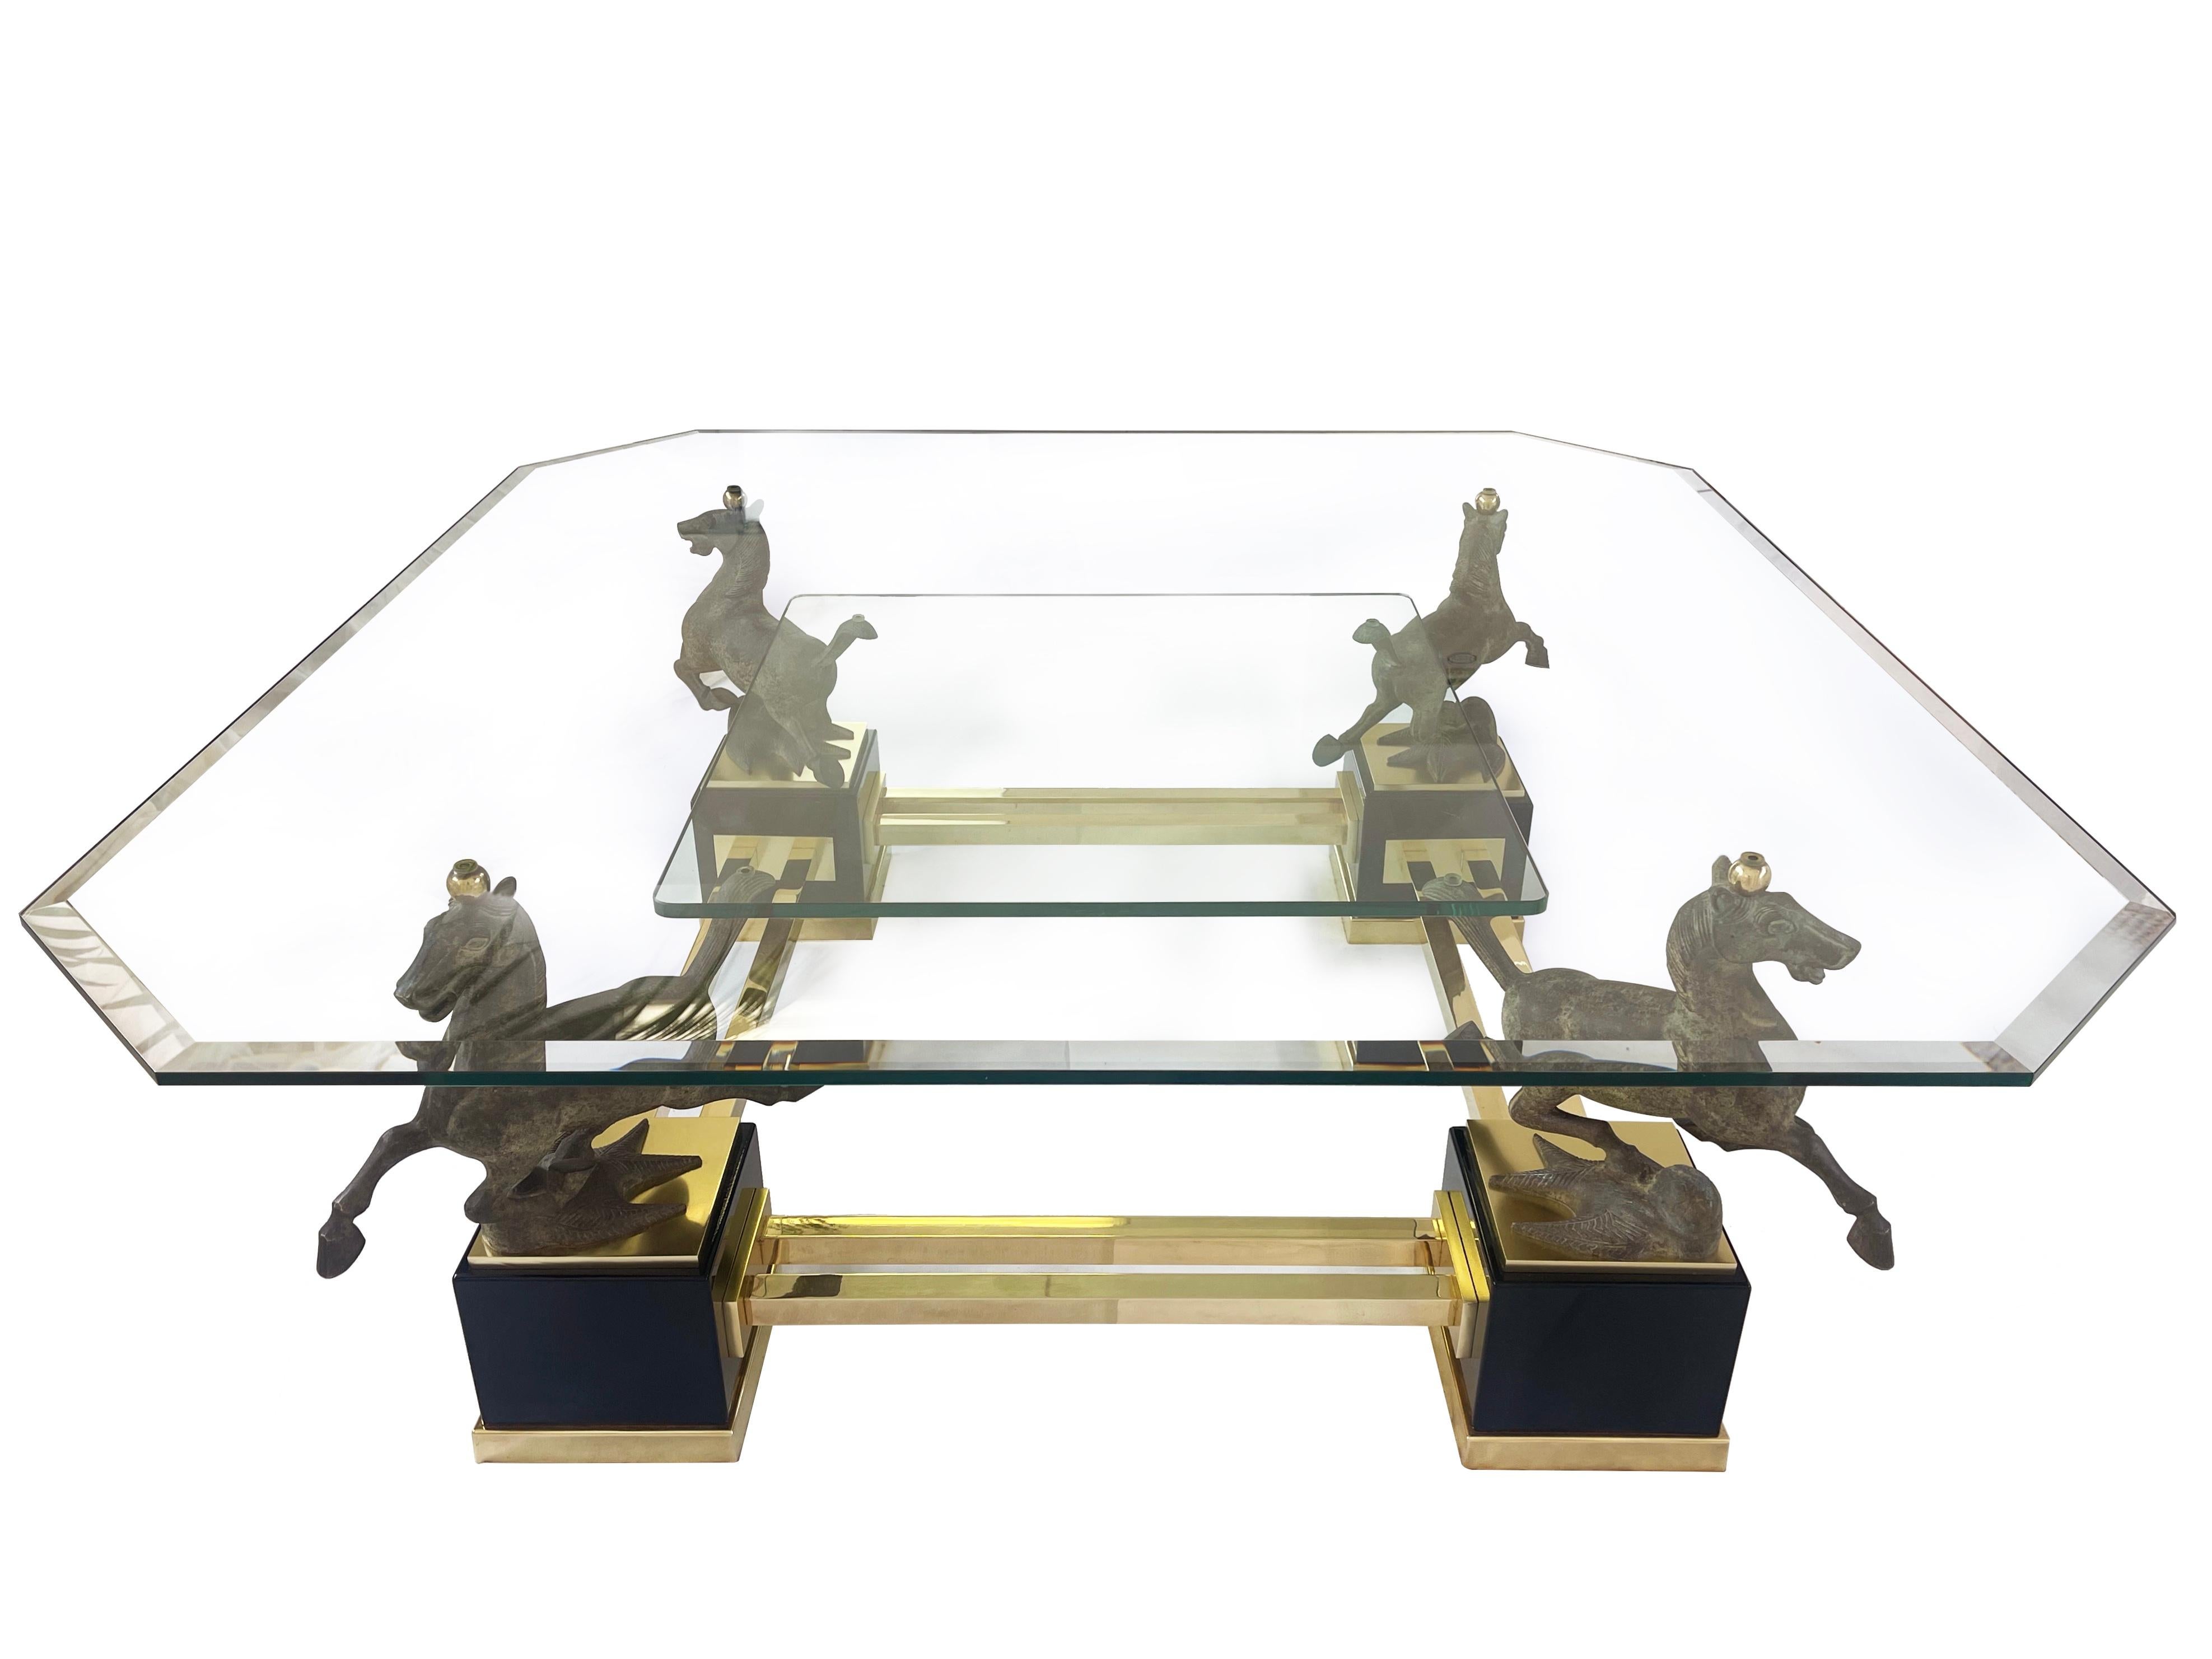 Very large & impressive square coffee table featuring four ''the flying horse of Gansu'' horses from solid bronze.
The table top is octagonal and made from beveled glass – and I assume the original.
The lower glass plate is square, sitting on – and